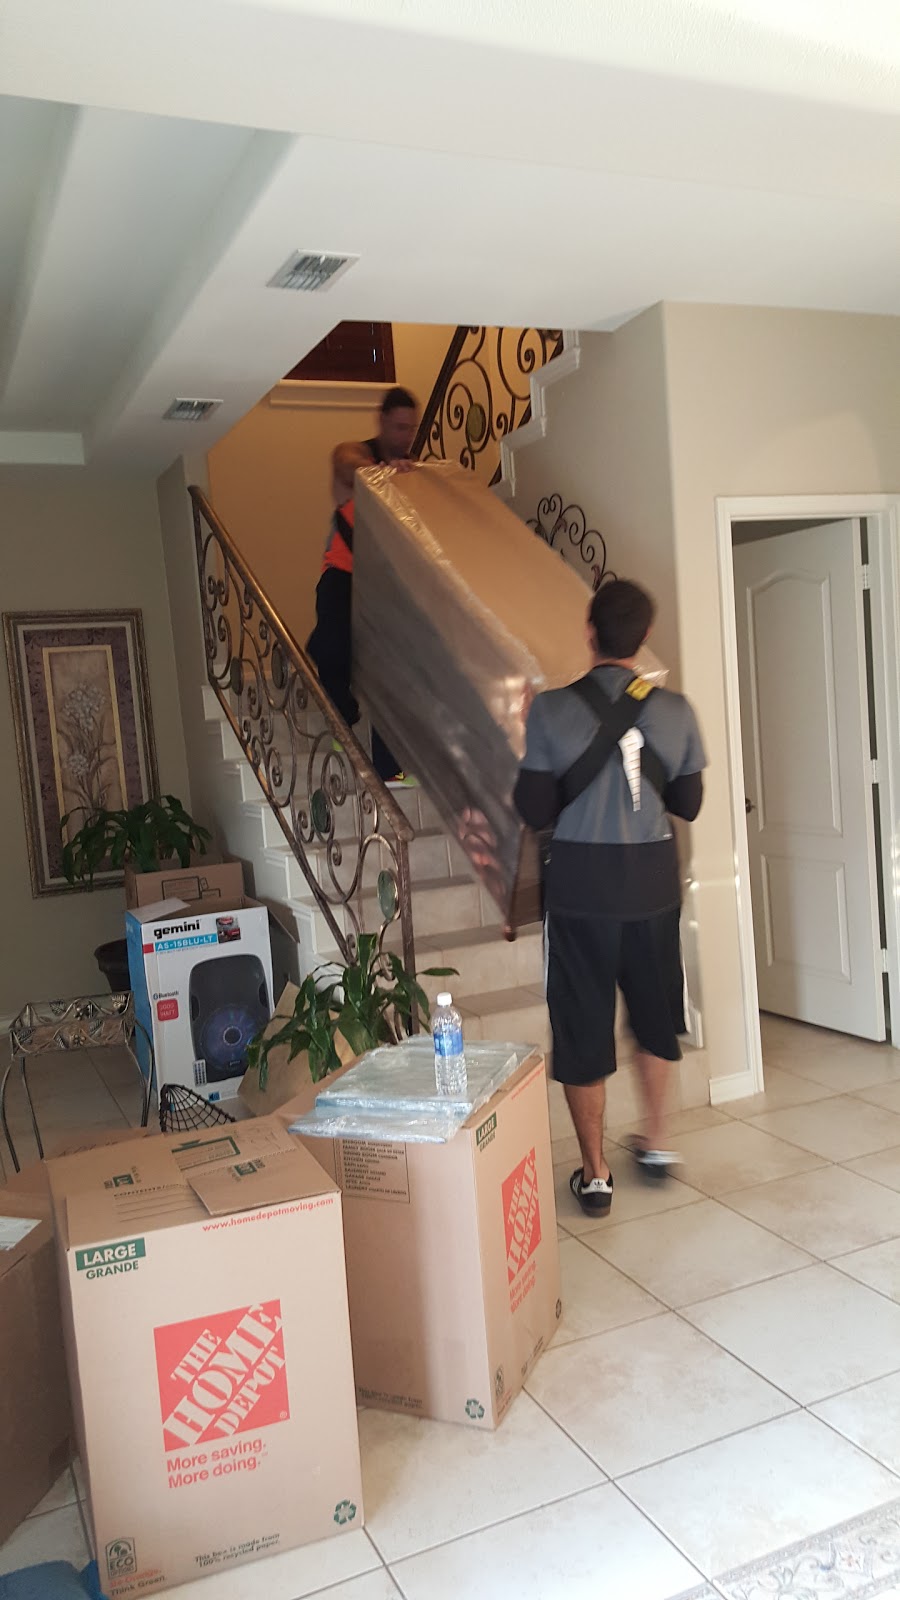 Professional Moving Preppers -Movers - Moving Company | 1917 Woodland Dr, Laredo, TX 78045, USA | Phone: (956) 235-7112